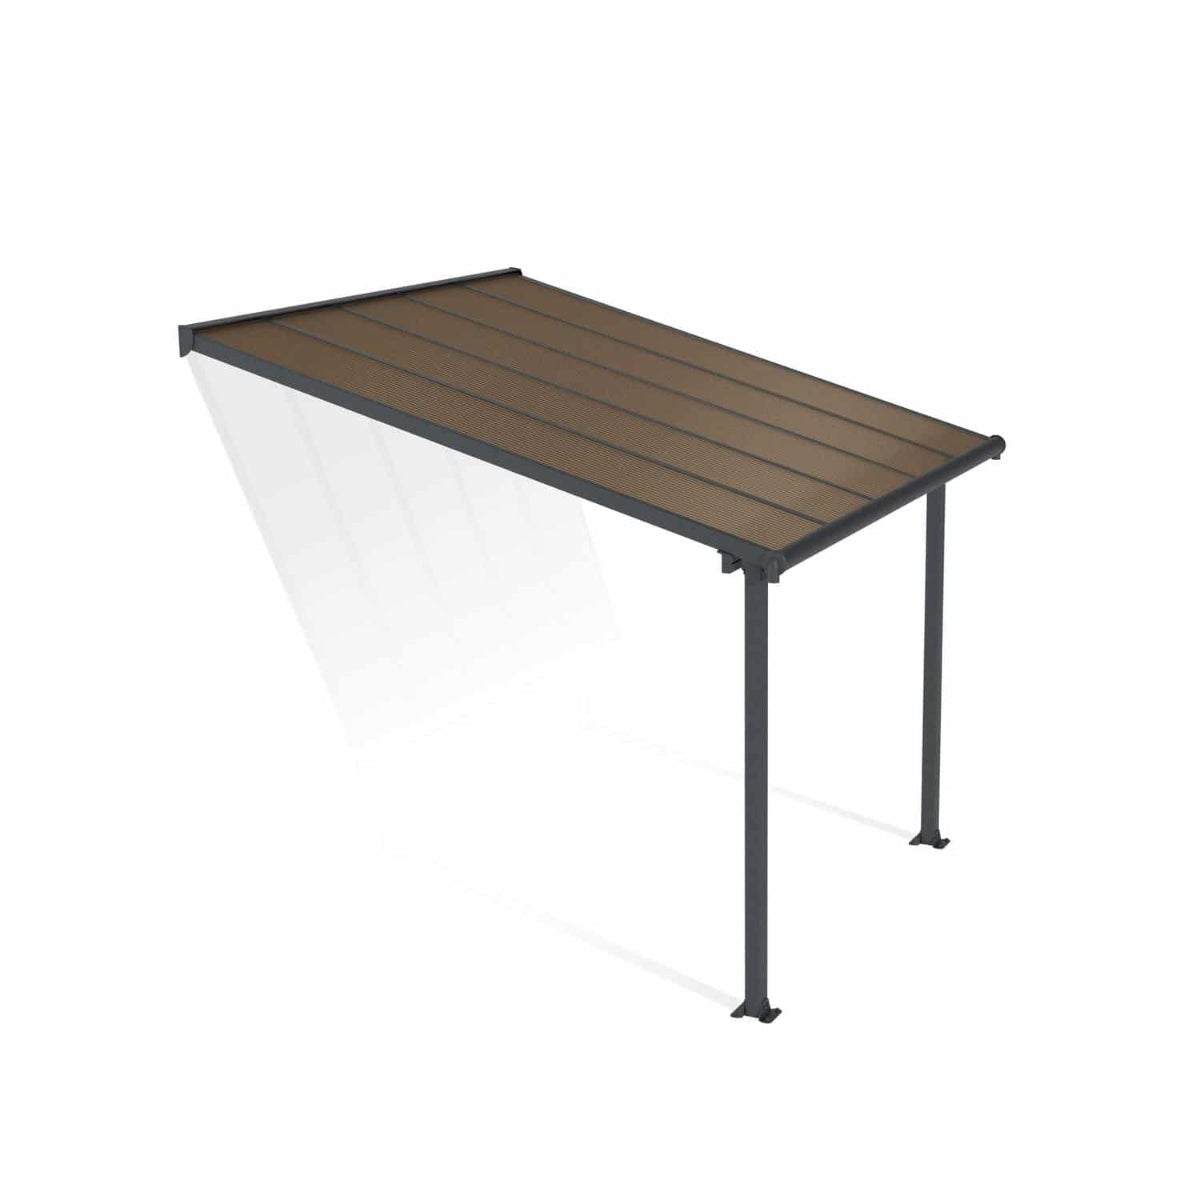 Olympia Patio Covers 10 x 10 ft. | Palram-Canopia - Delightful Yard